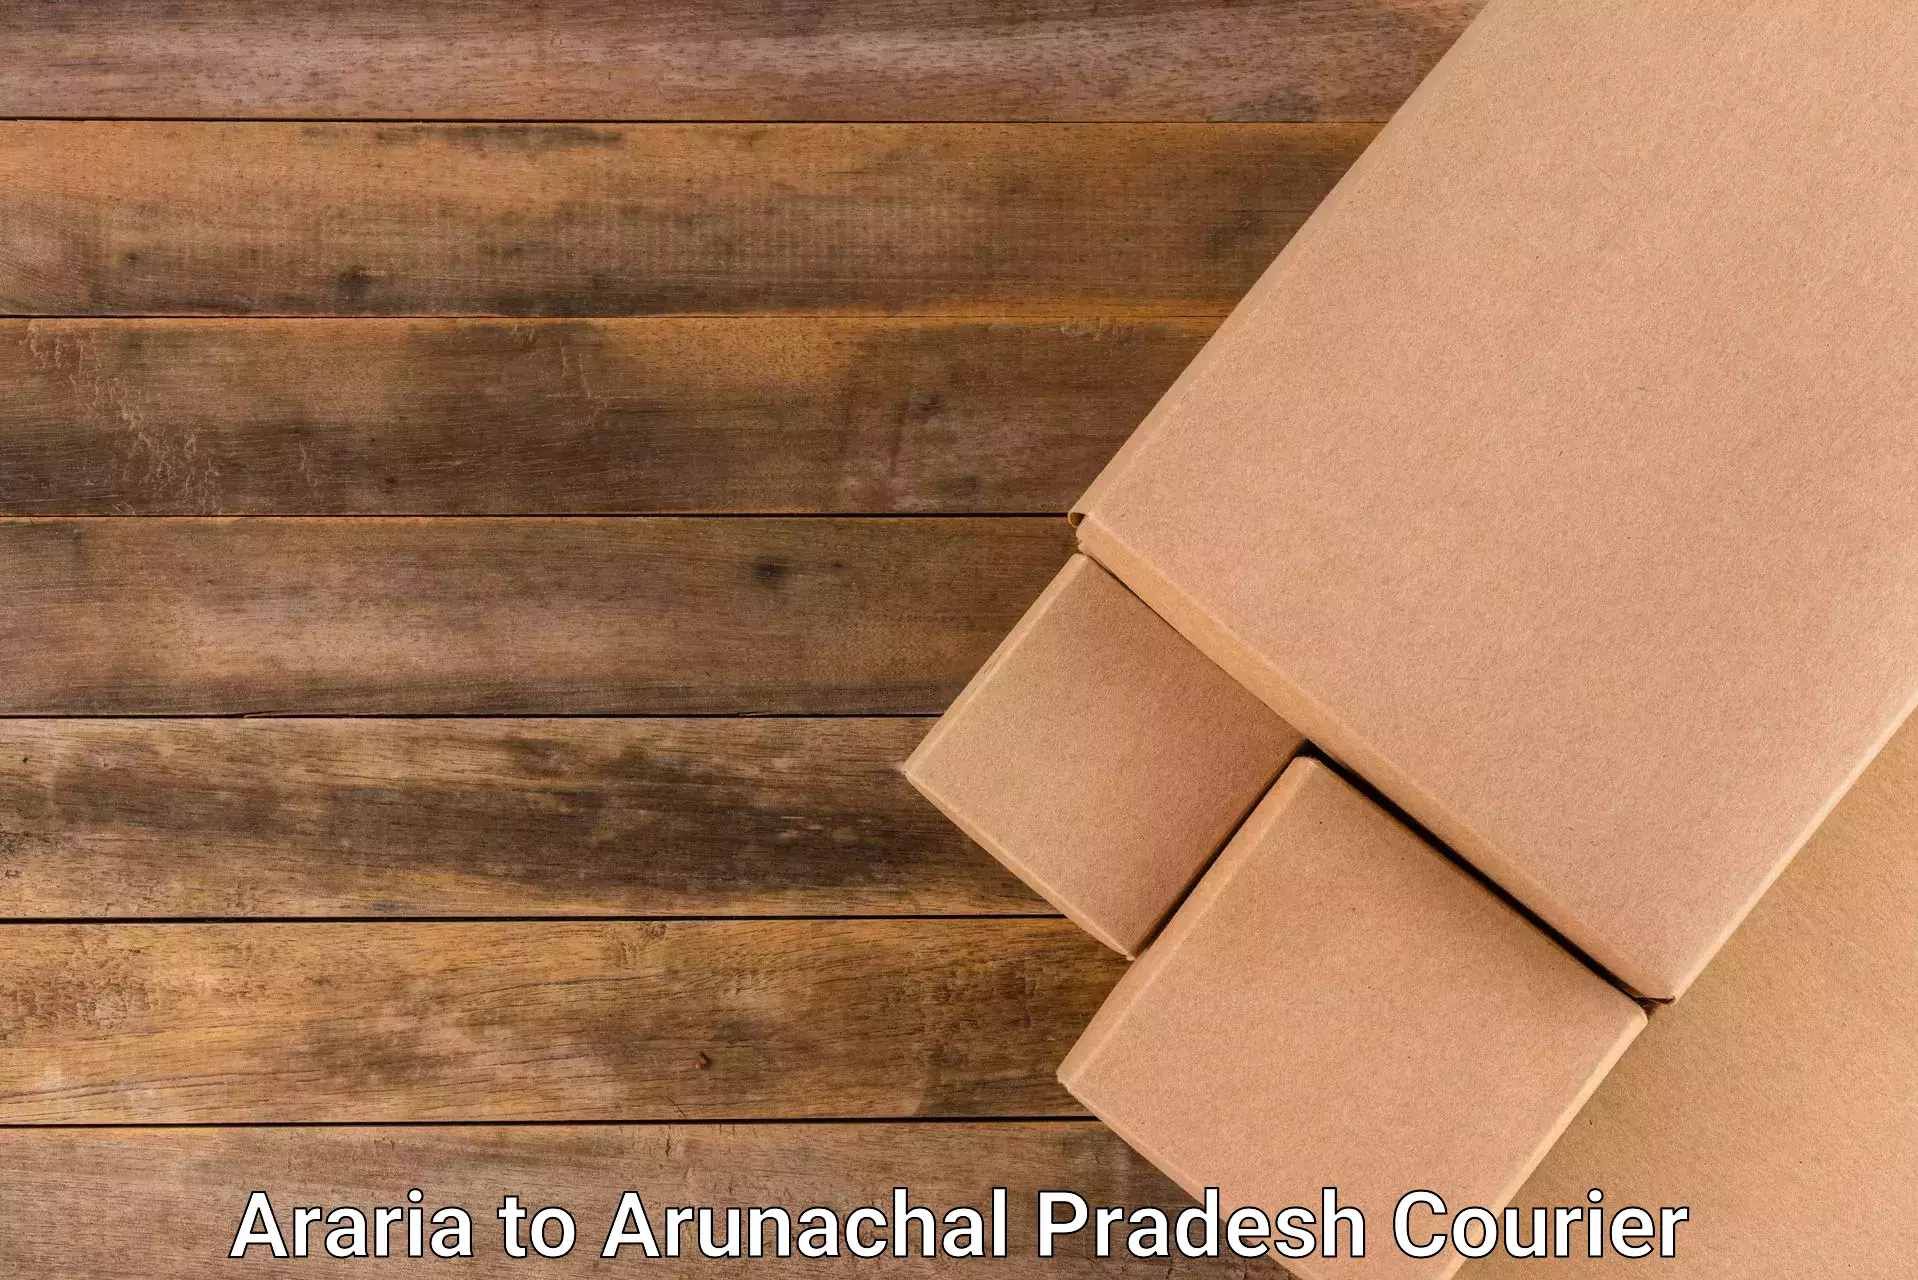 State-of-the-art courier technology Araria to Jairampur